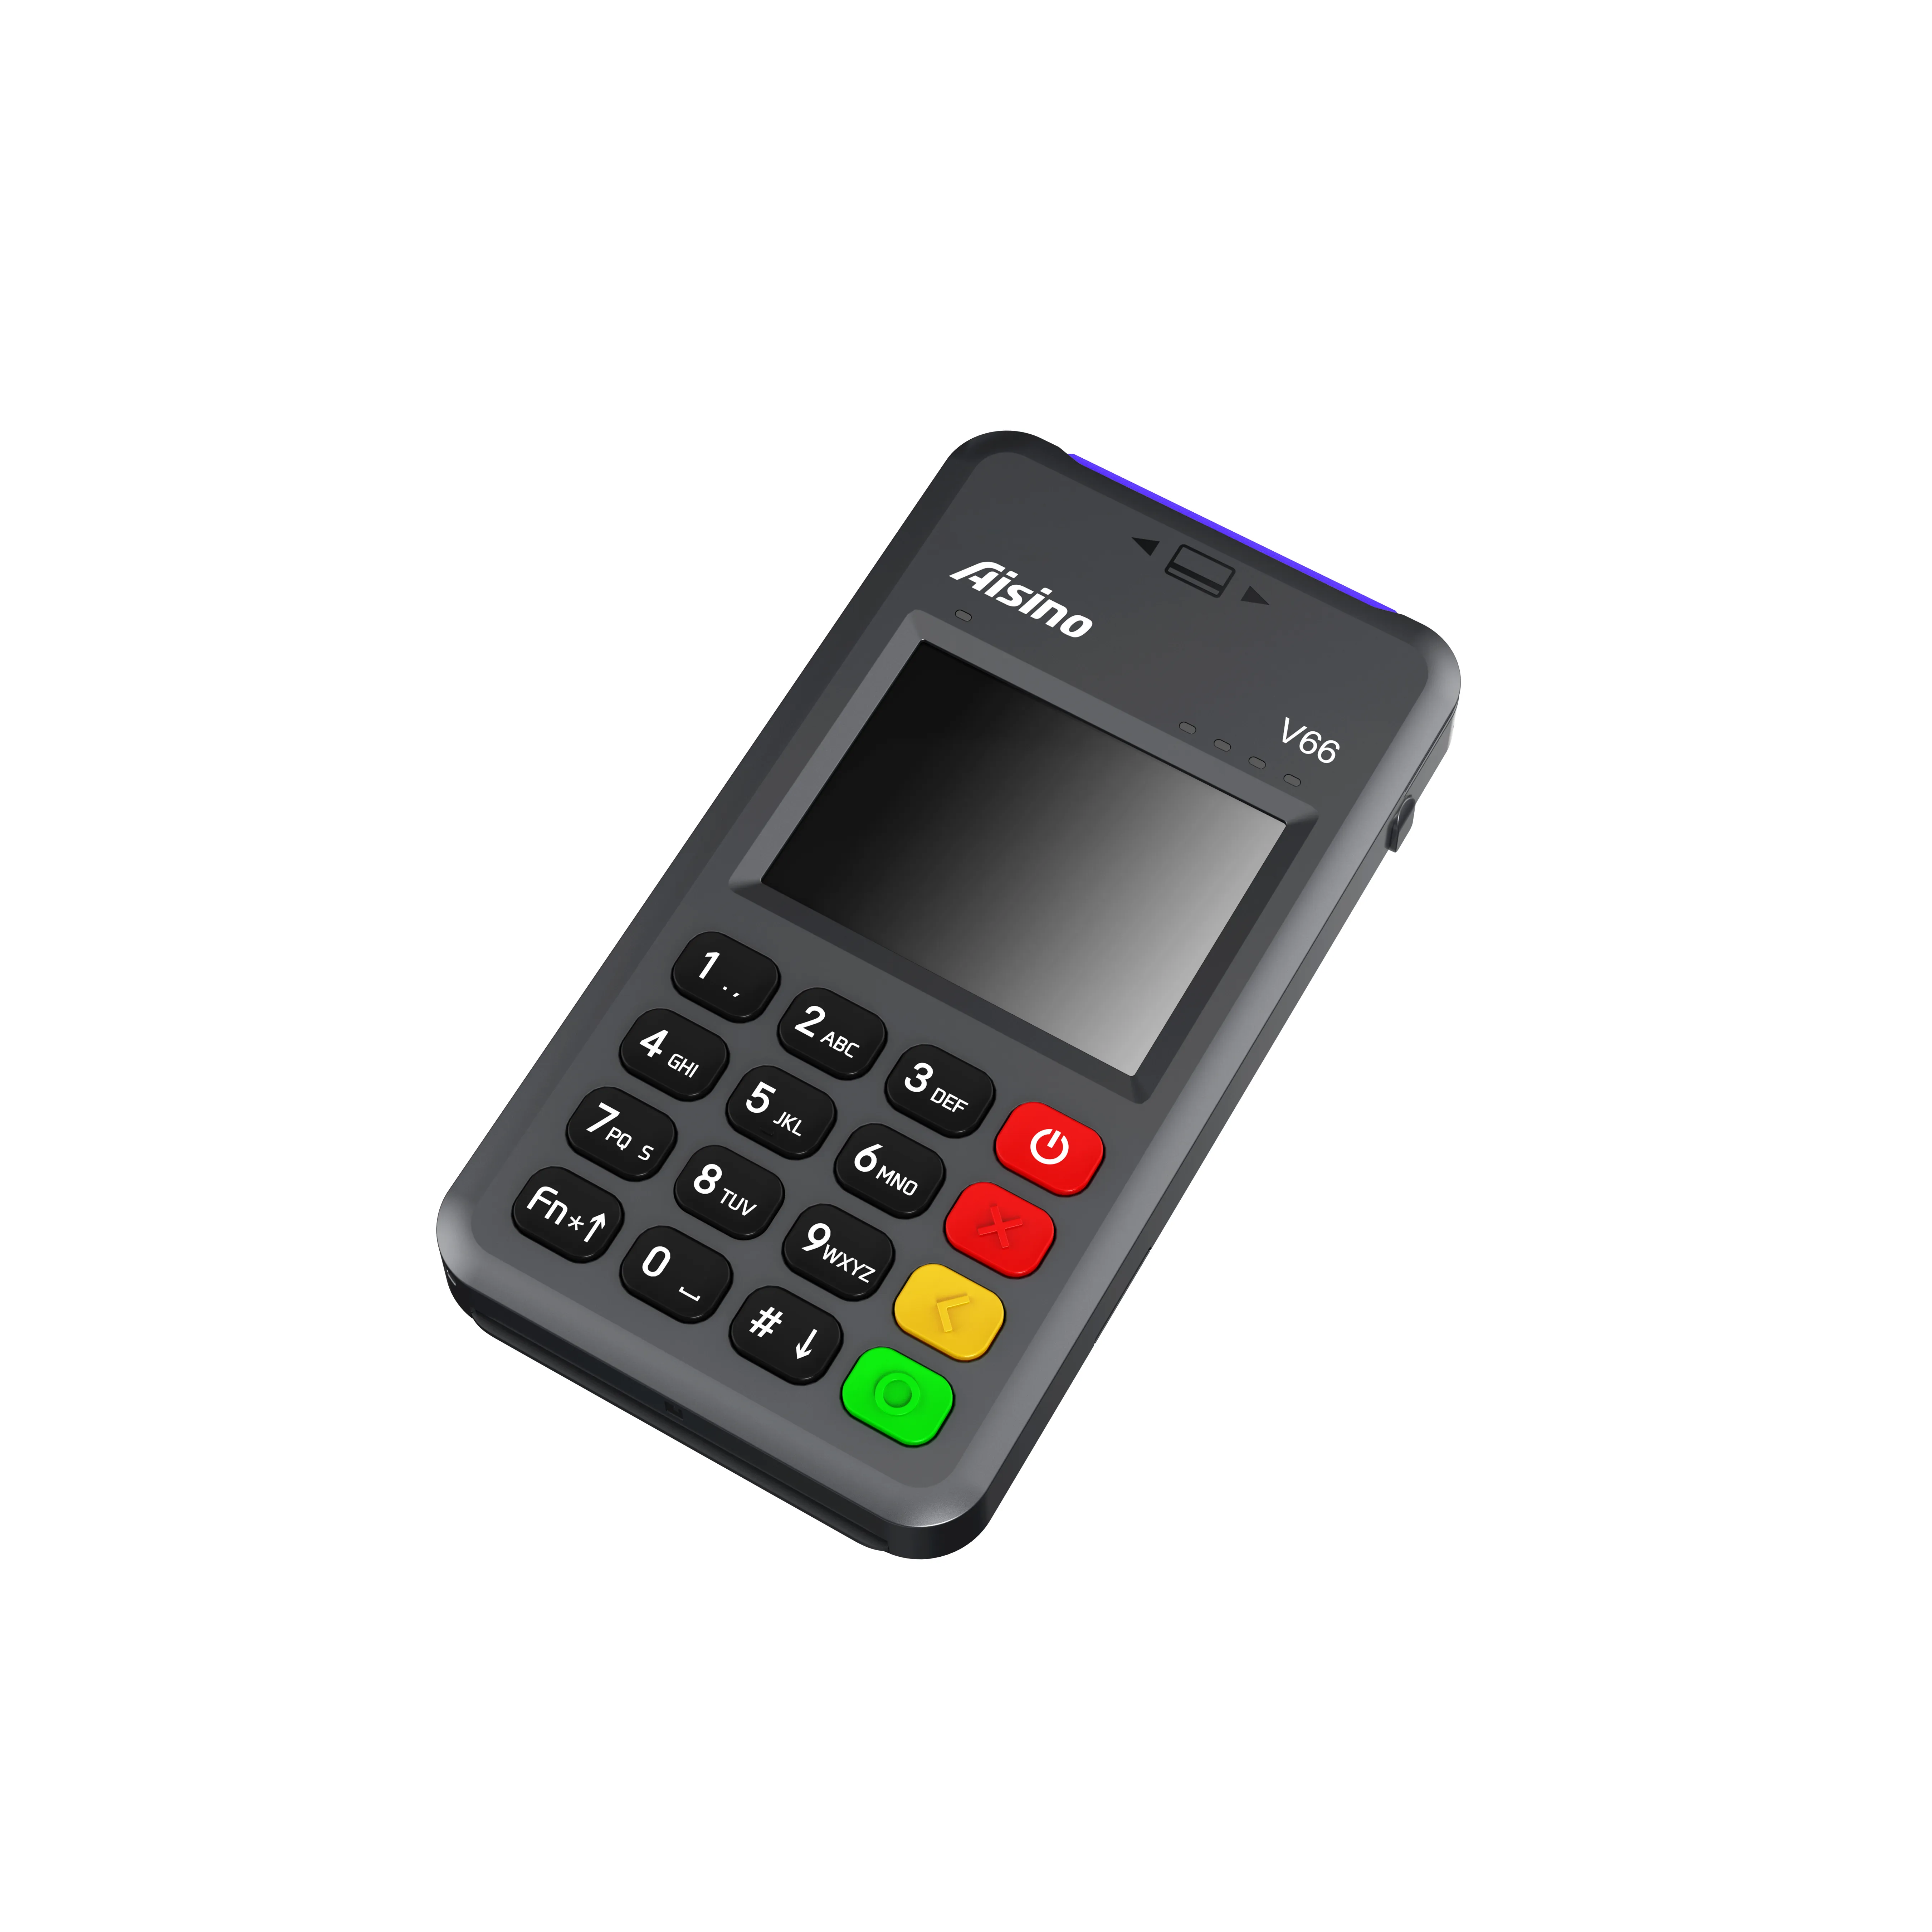 NFC Contactless Omni Payment Aisino V66 POS Machine tradizionale POS